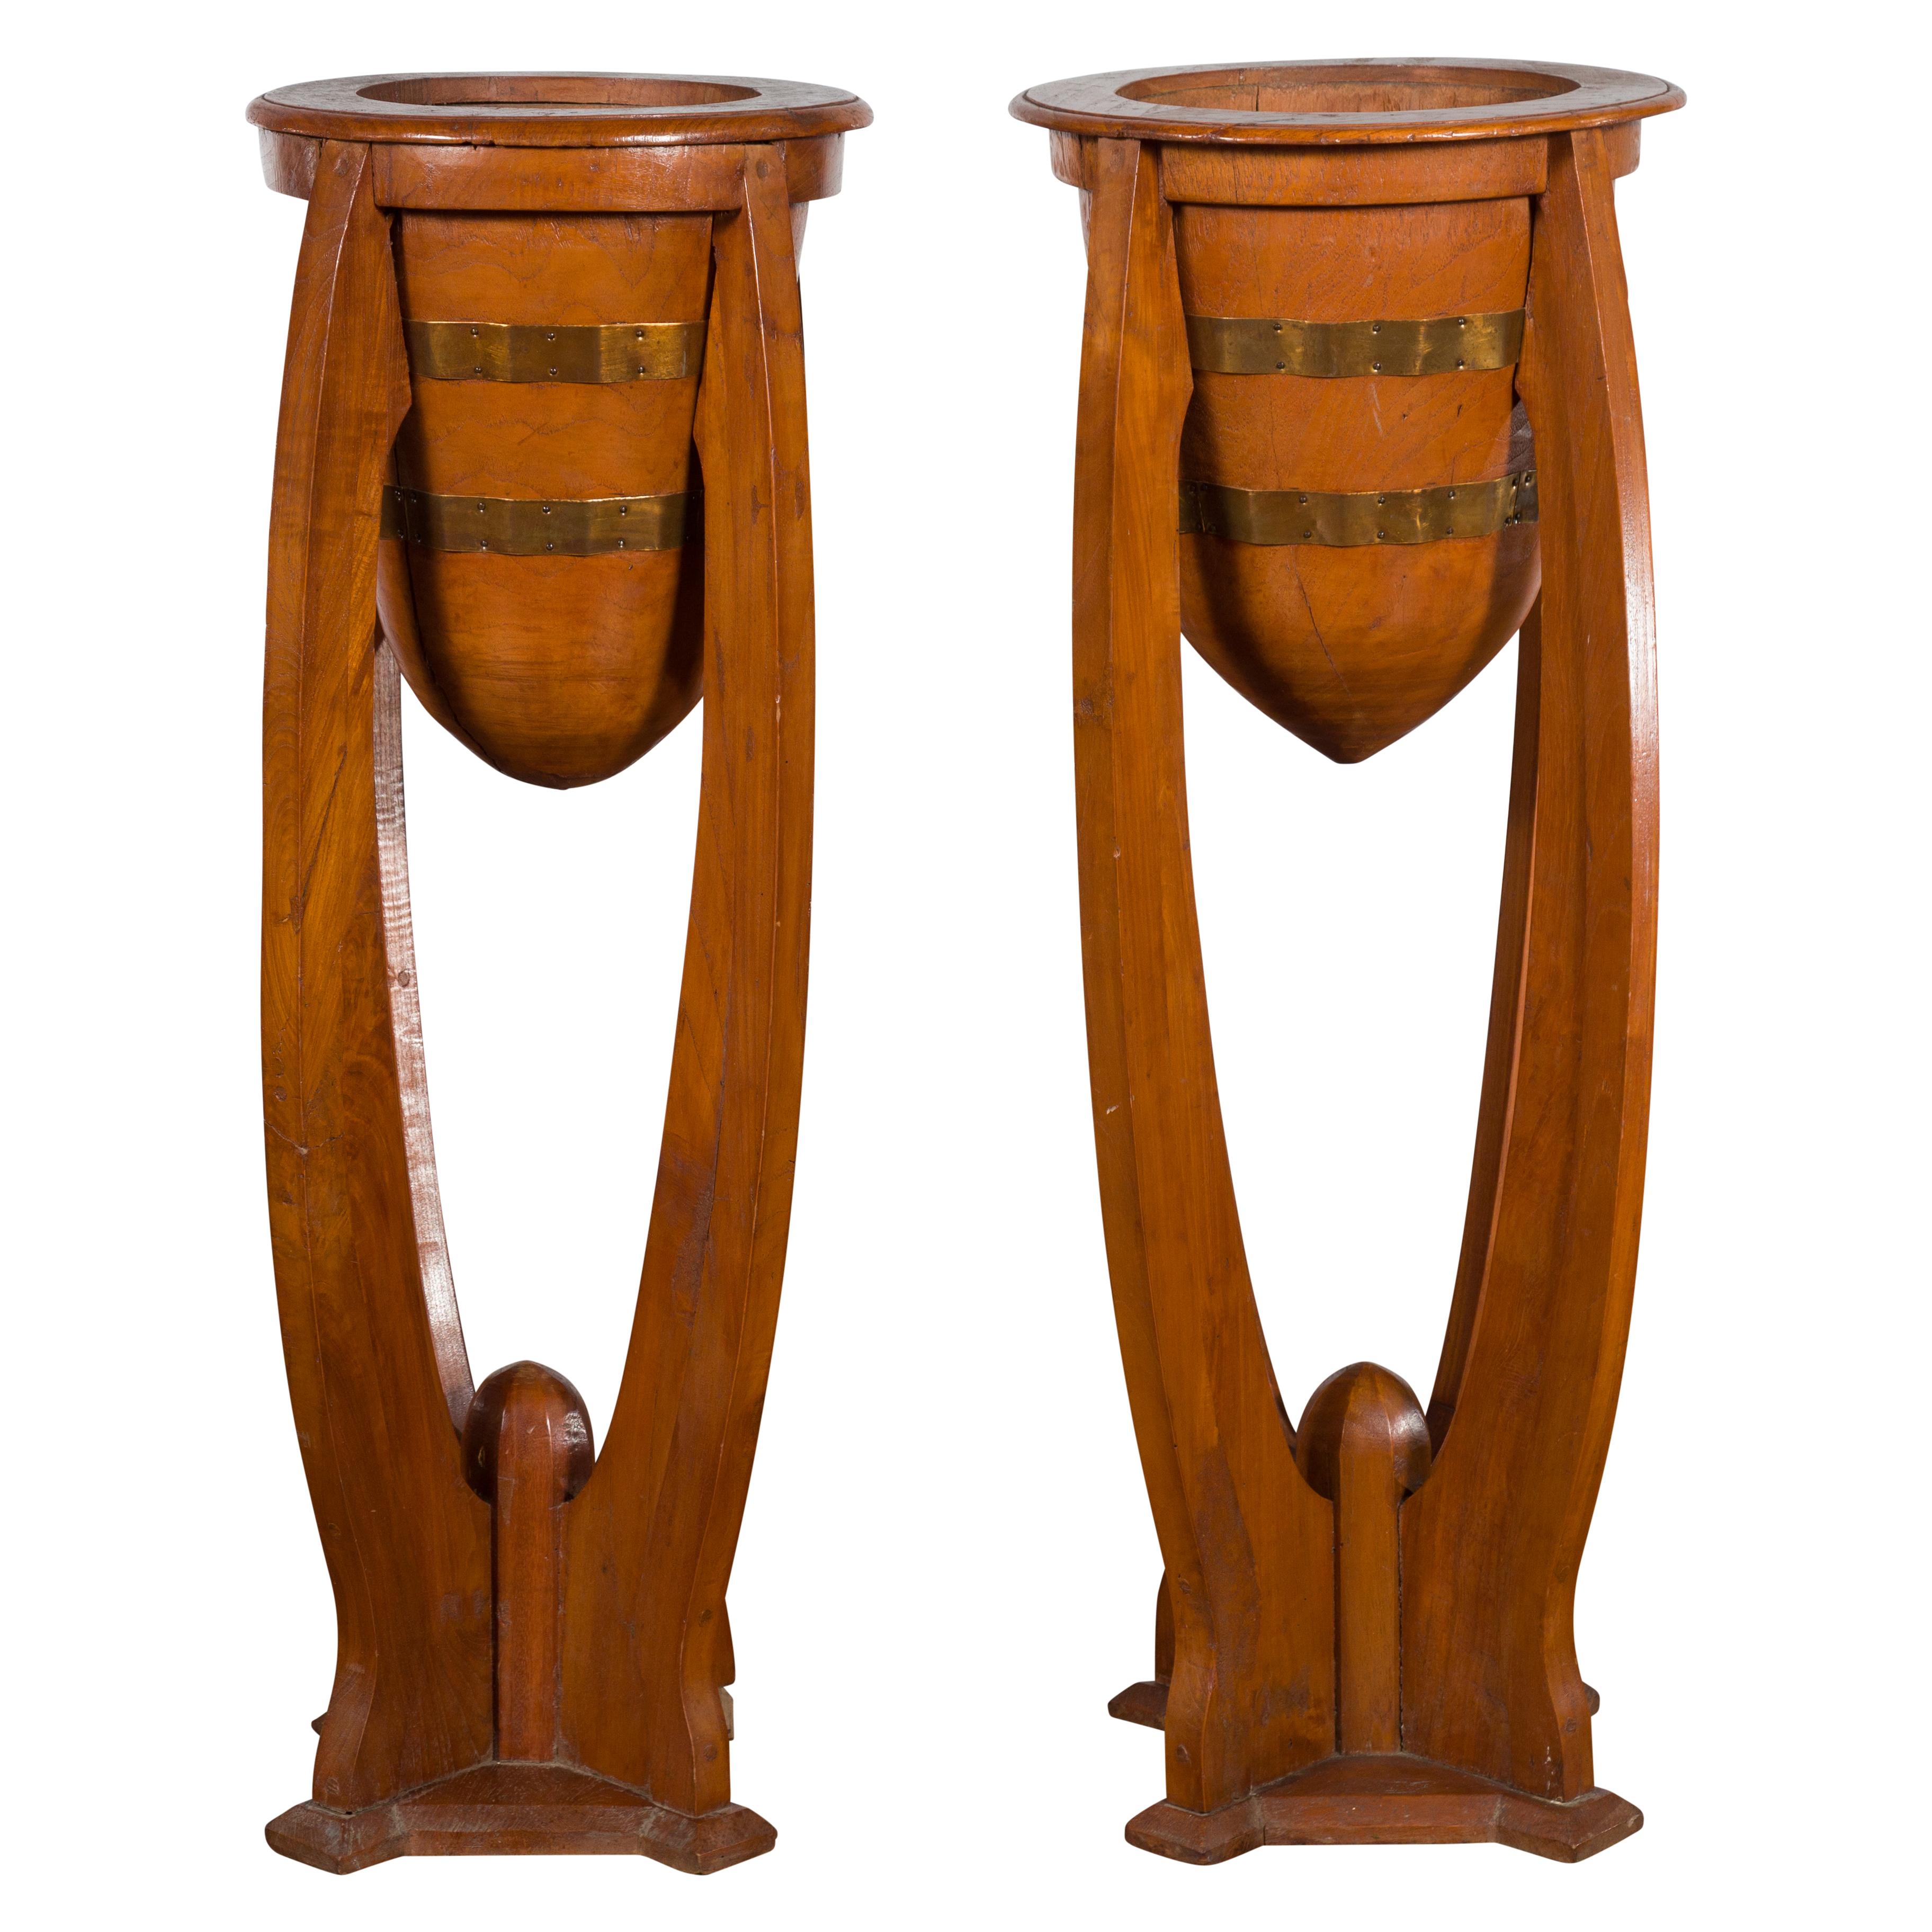 Large Pair of Javanese Art Deco Style Teak Wood Plant Stands with Brass Braces For Sale 10